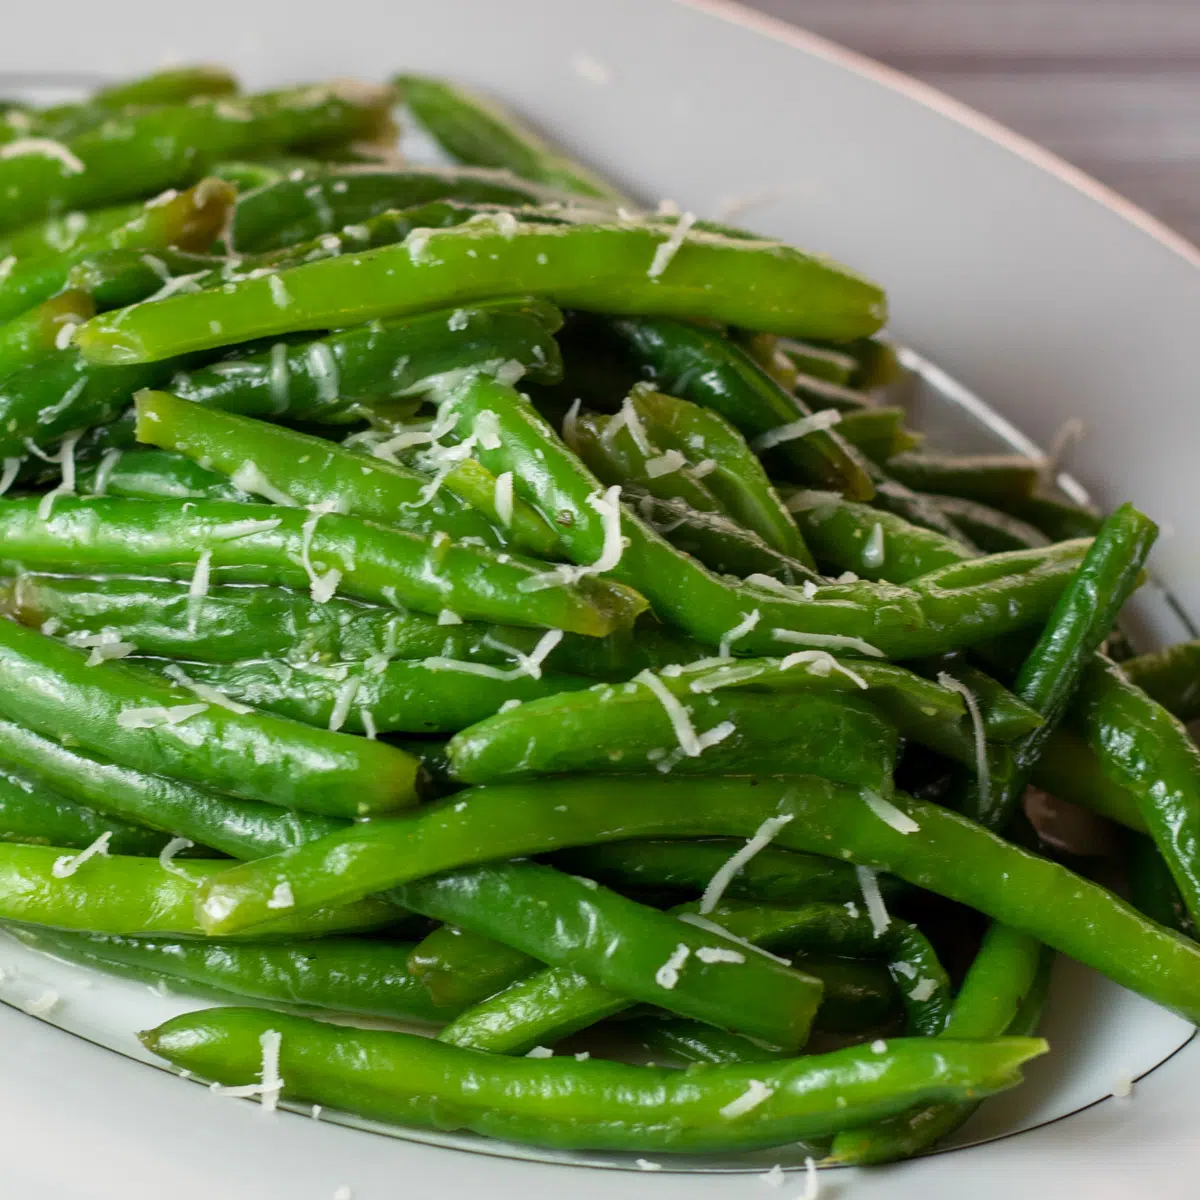 Square image of sauteed green beans in a serving dish with Parmesan cheese sprinkled over.